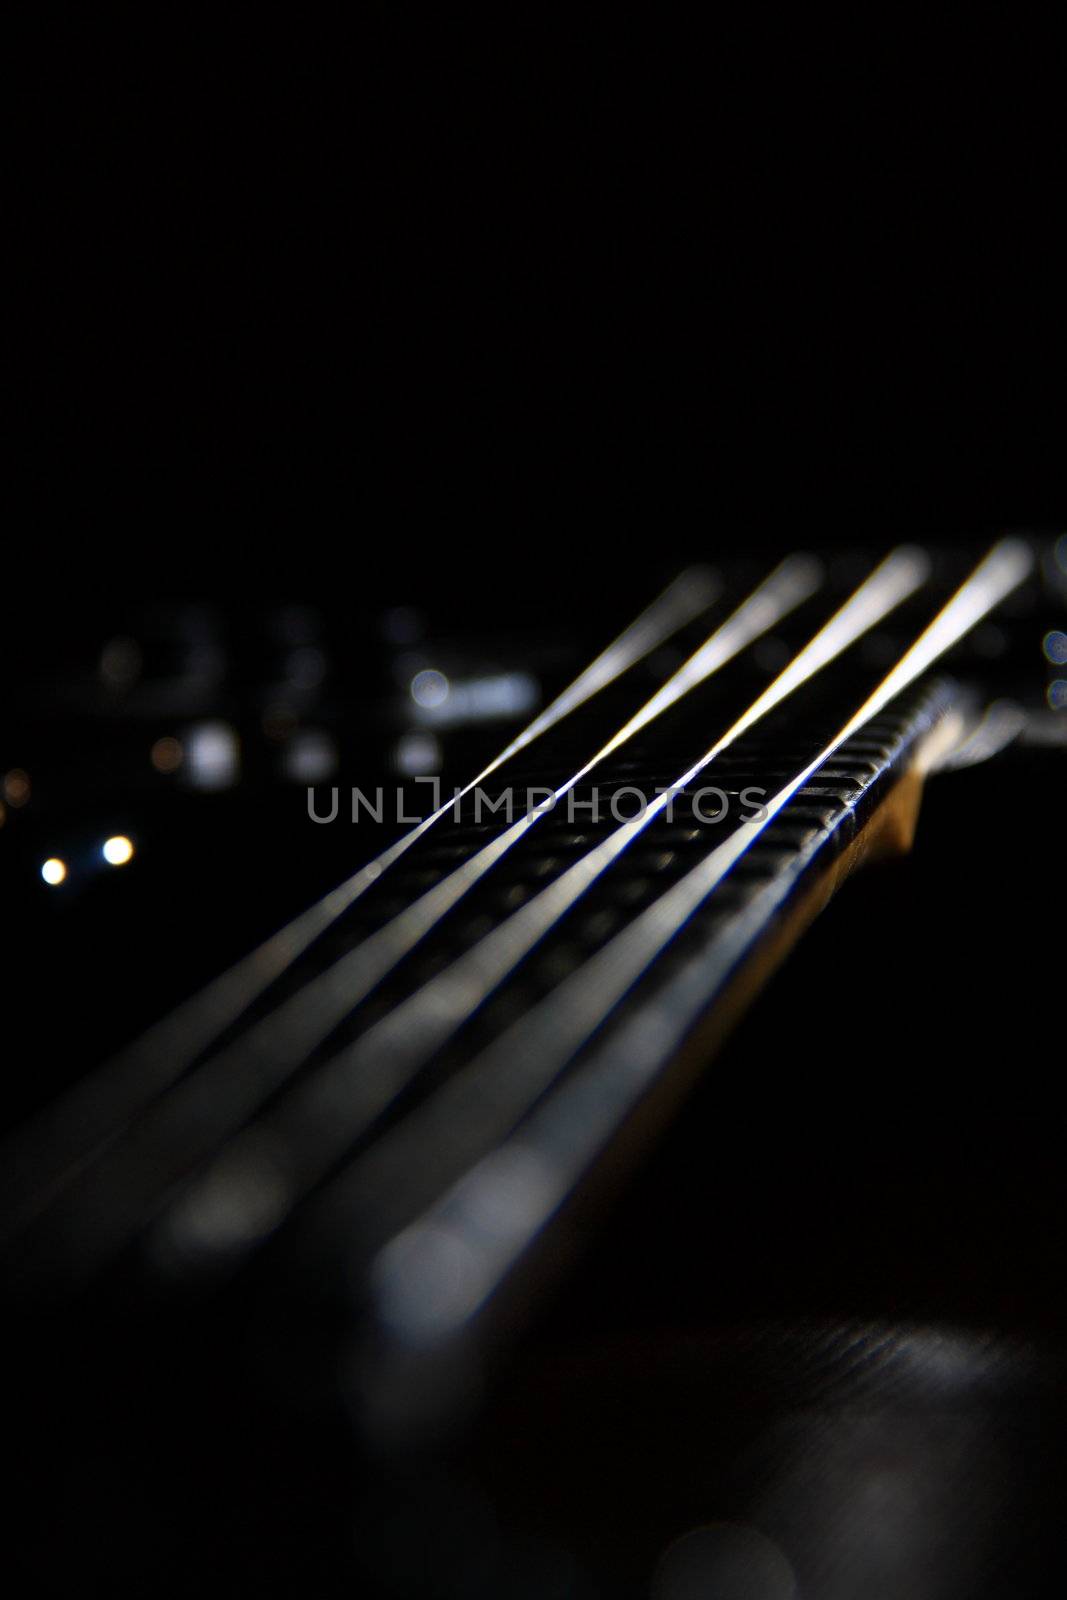 bass guitar with four strings on black ground 